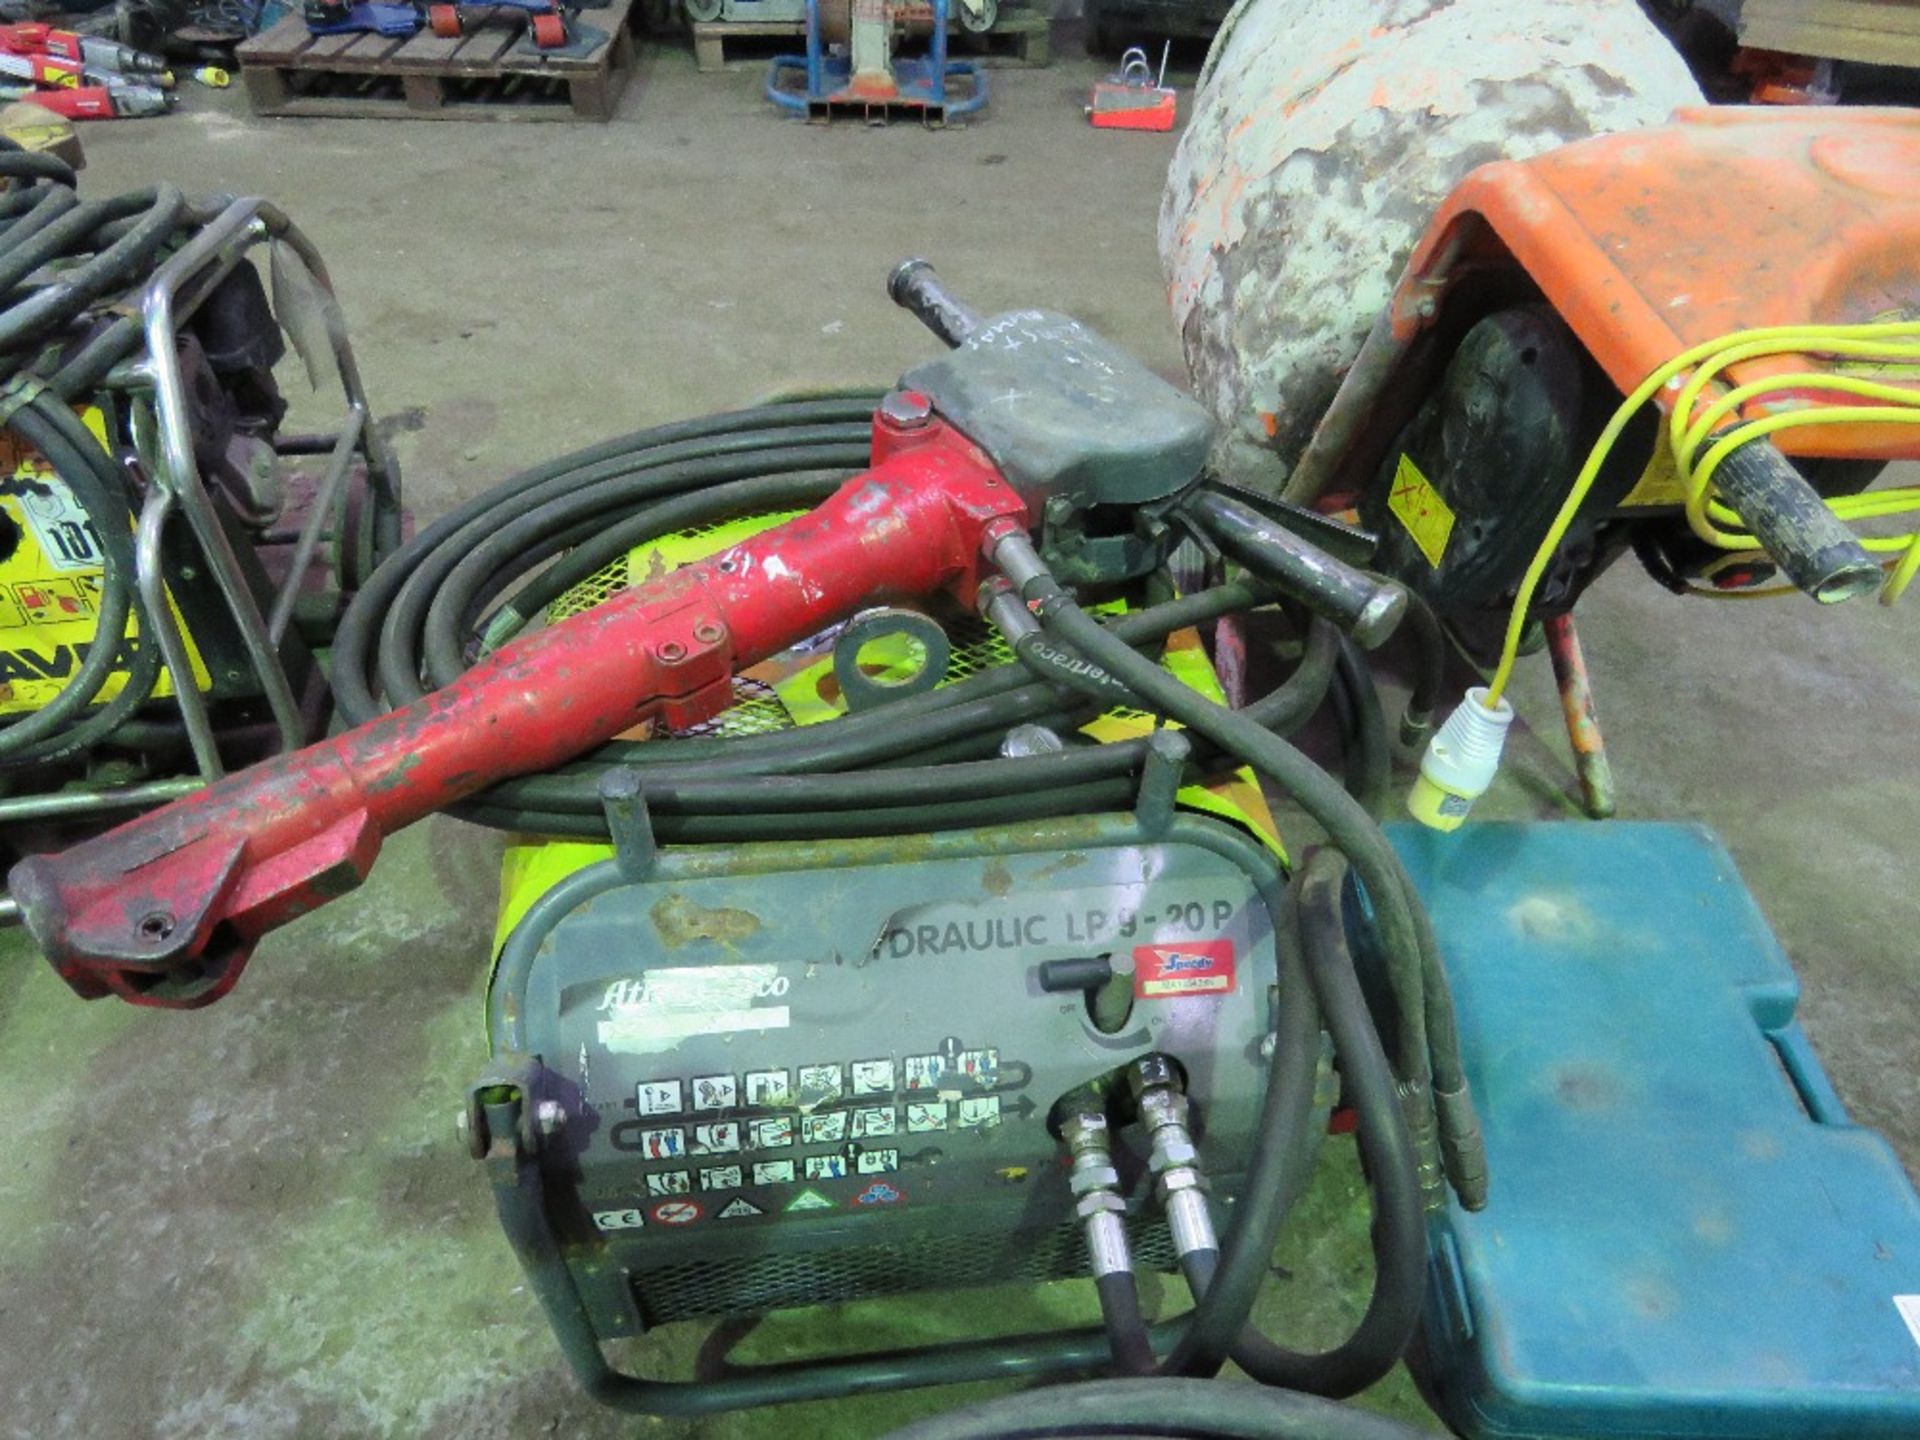 ATLAS COPCO HYDRAULIC BREAKER PACK WITH HOSE AND GUN. WHEN TESTED WAS SEEN TO RUN AND MAKE PRESSURE - Image 2 of 3